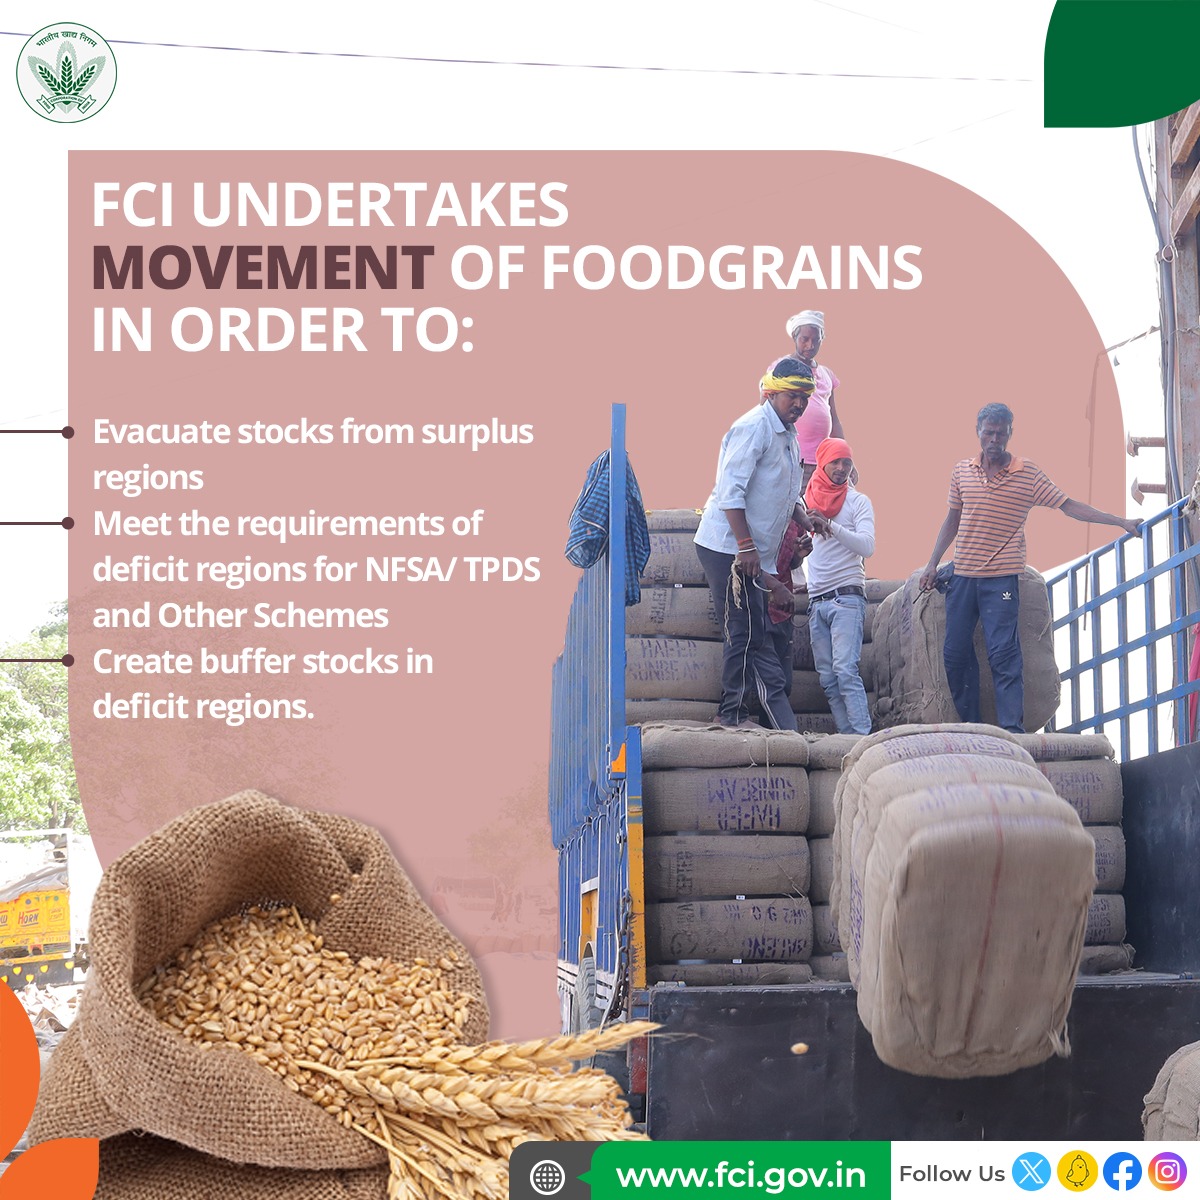 Movement plays a very important role in the working of FCI as well as in fulfilling the objectives of Food Policy and National Food Security Act.